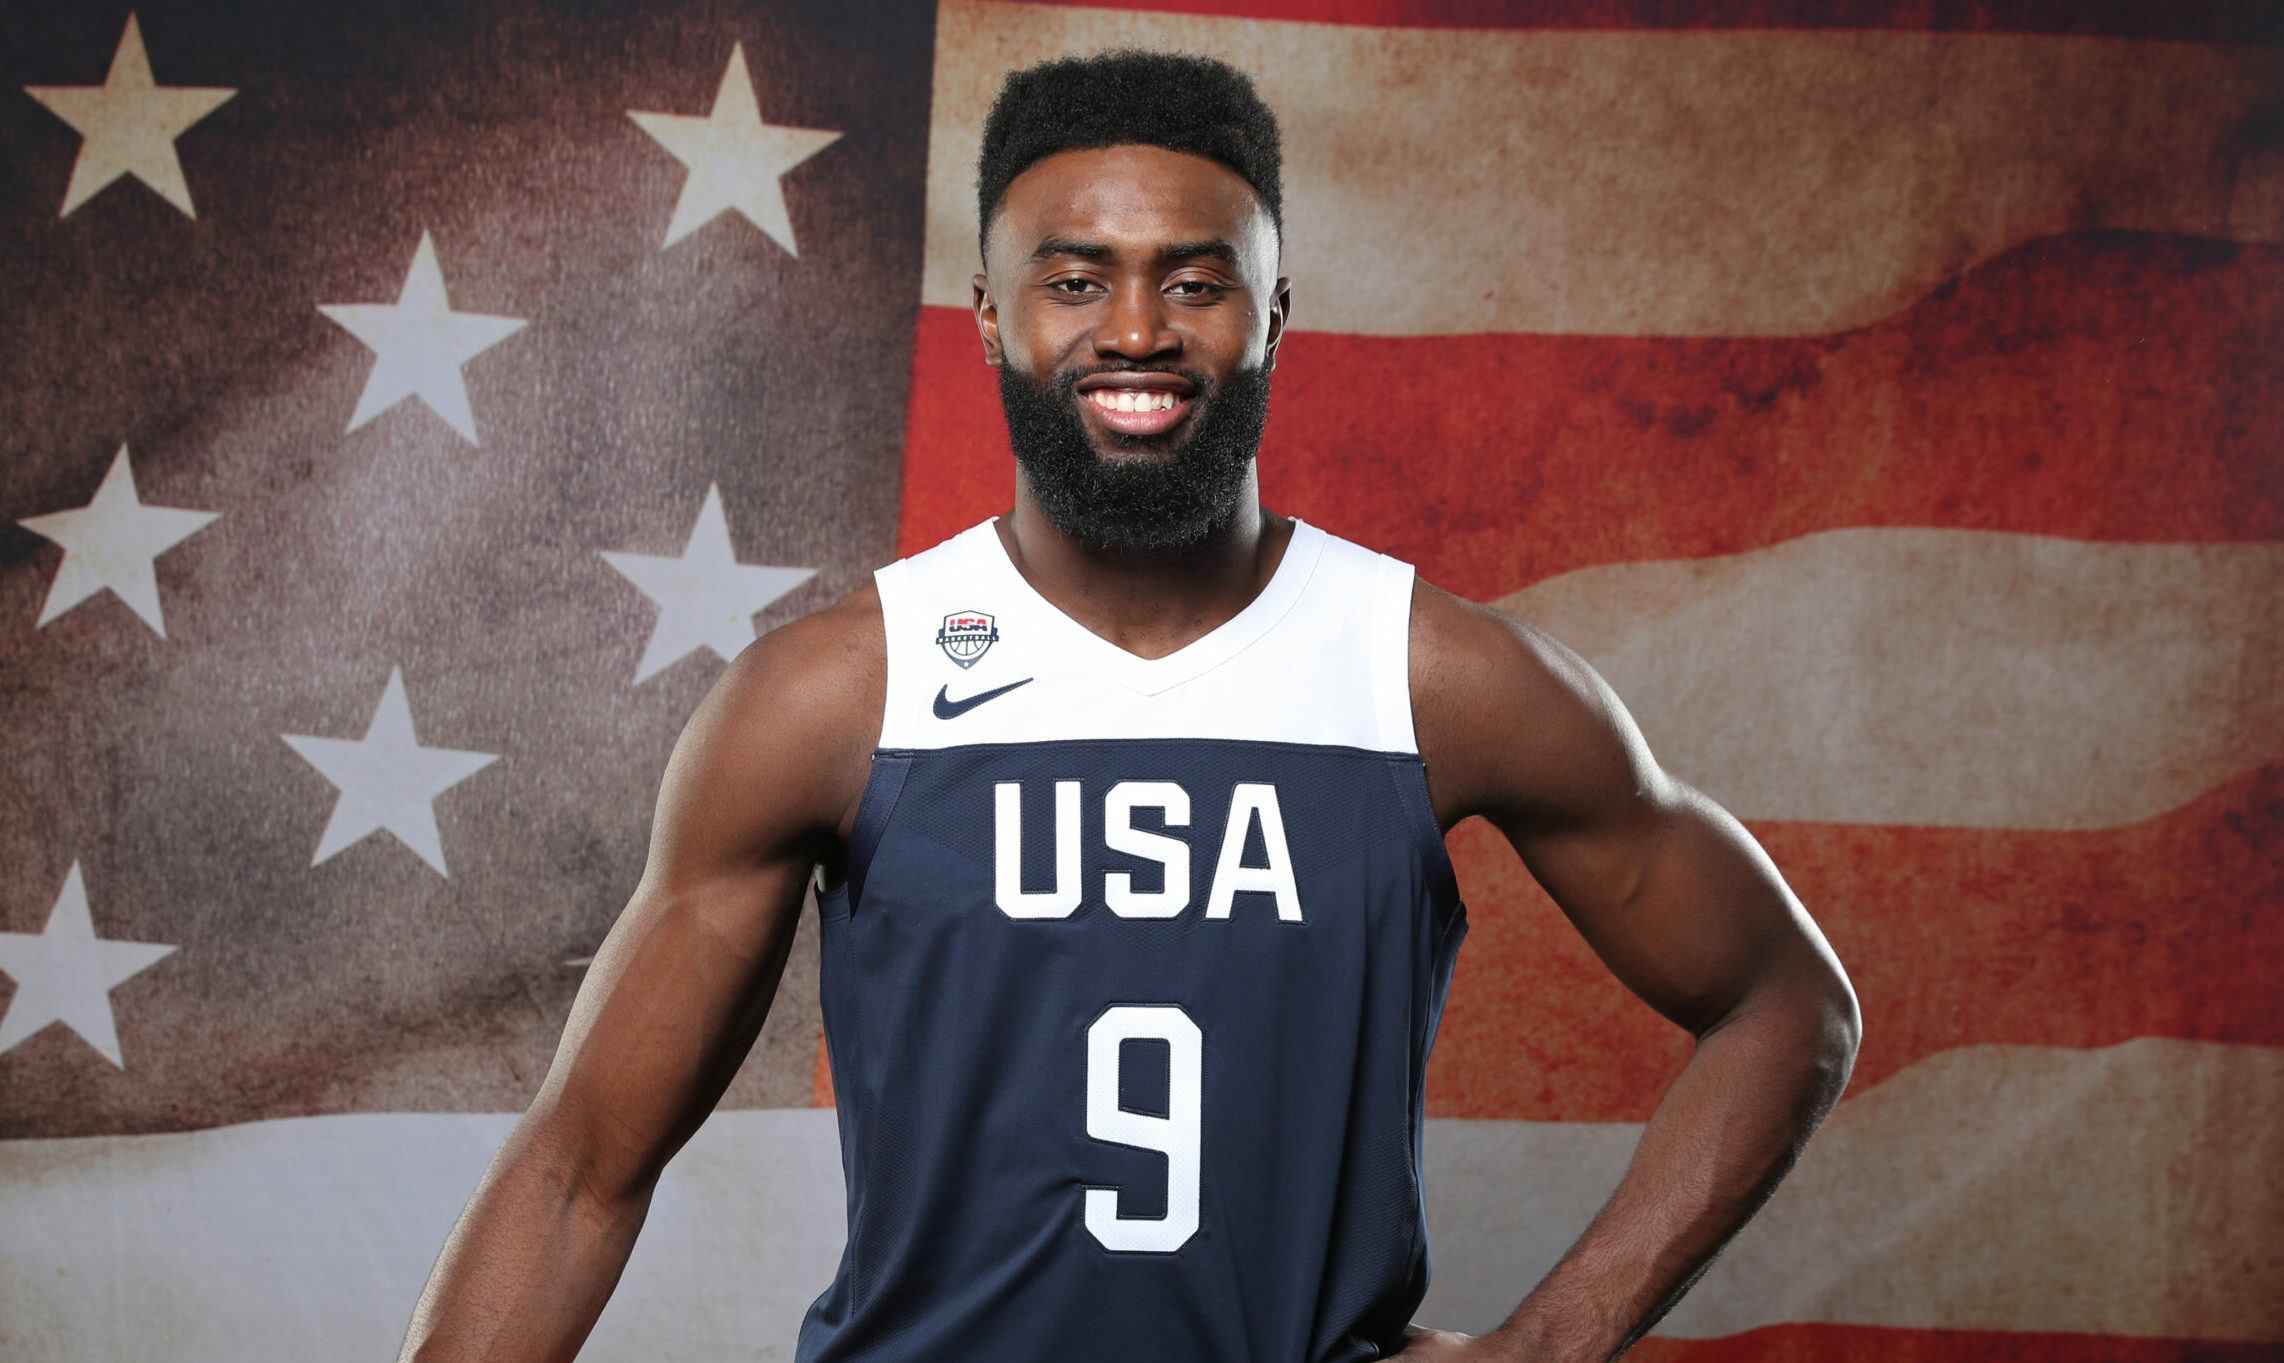 Ballin for a Cause' Jaylen Brown Vows To Use His $300M Contract To